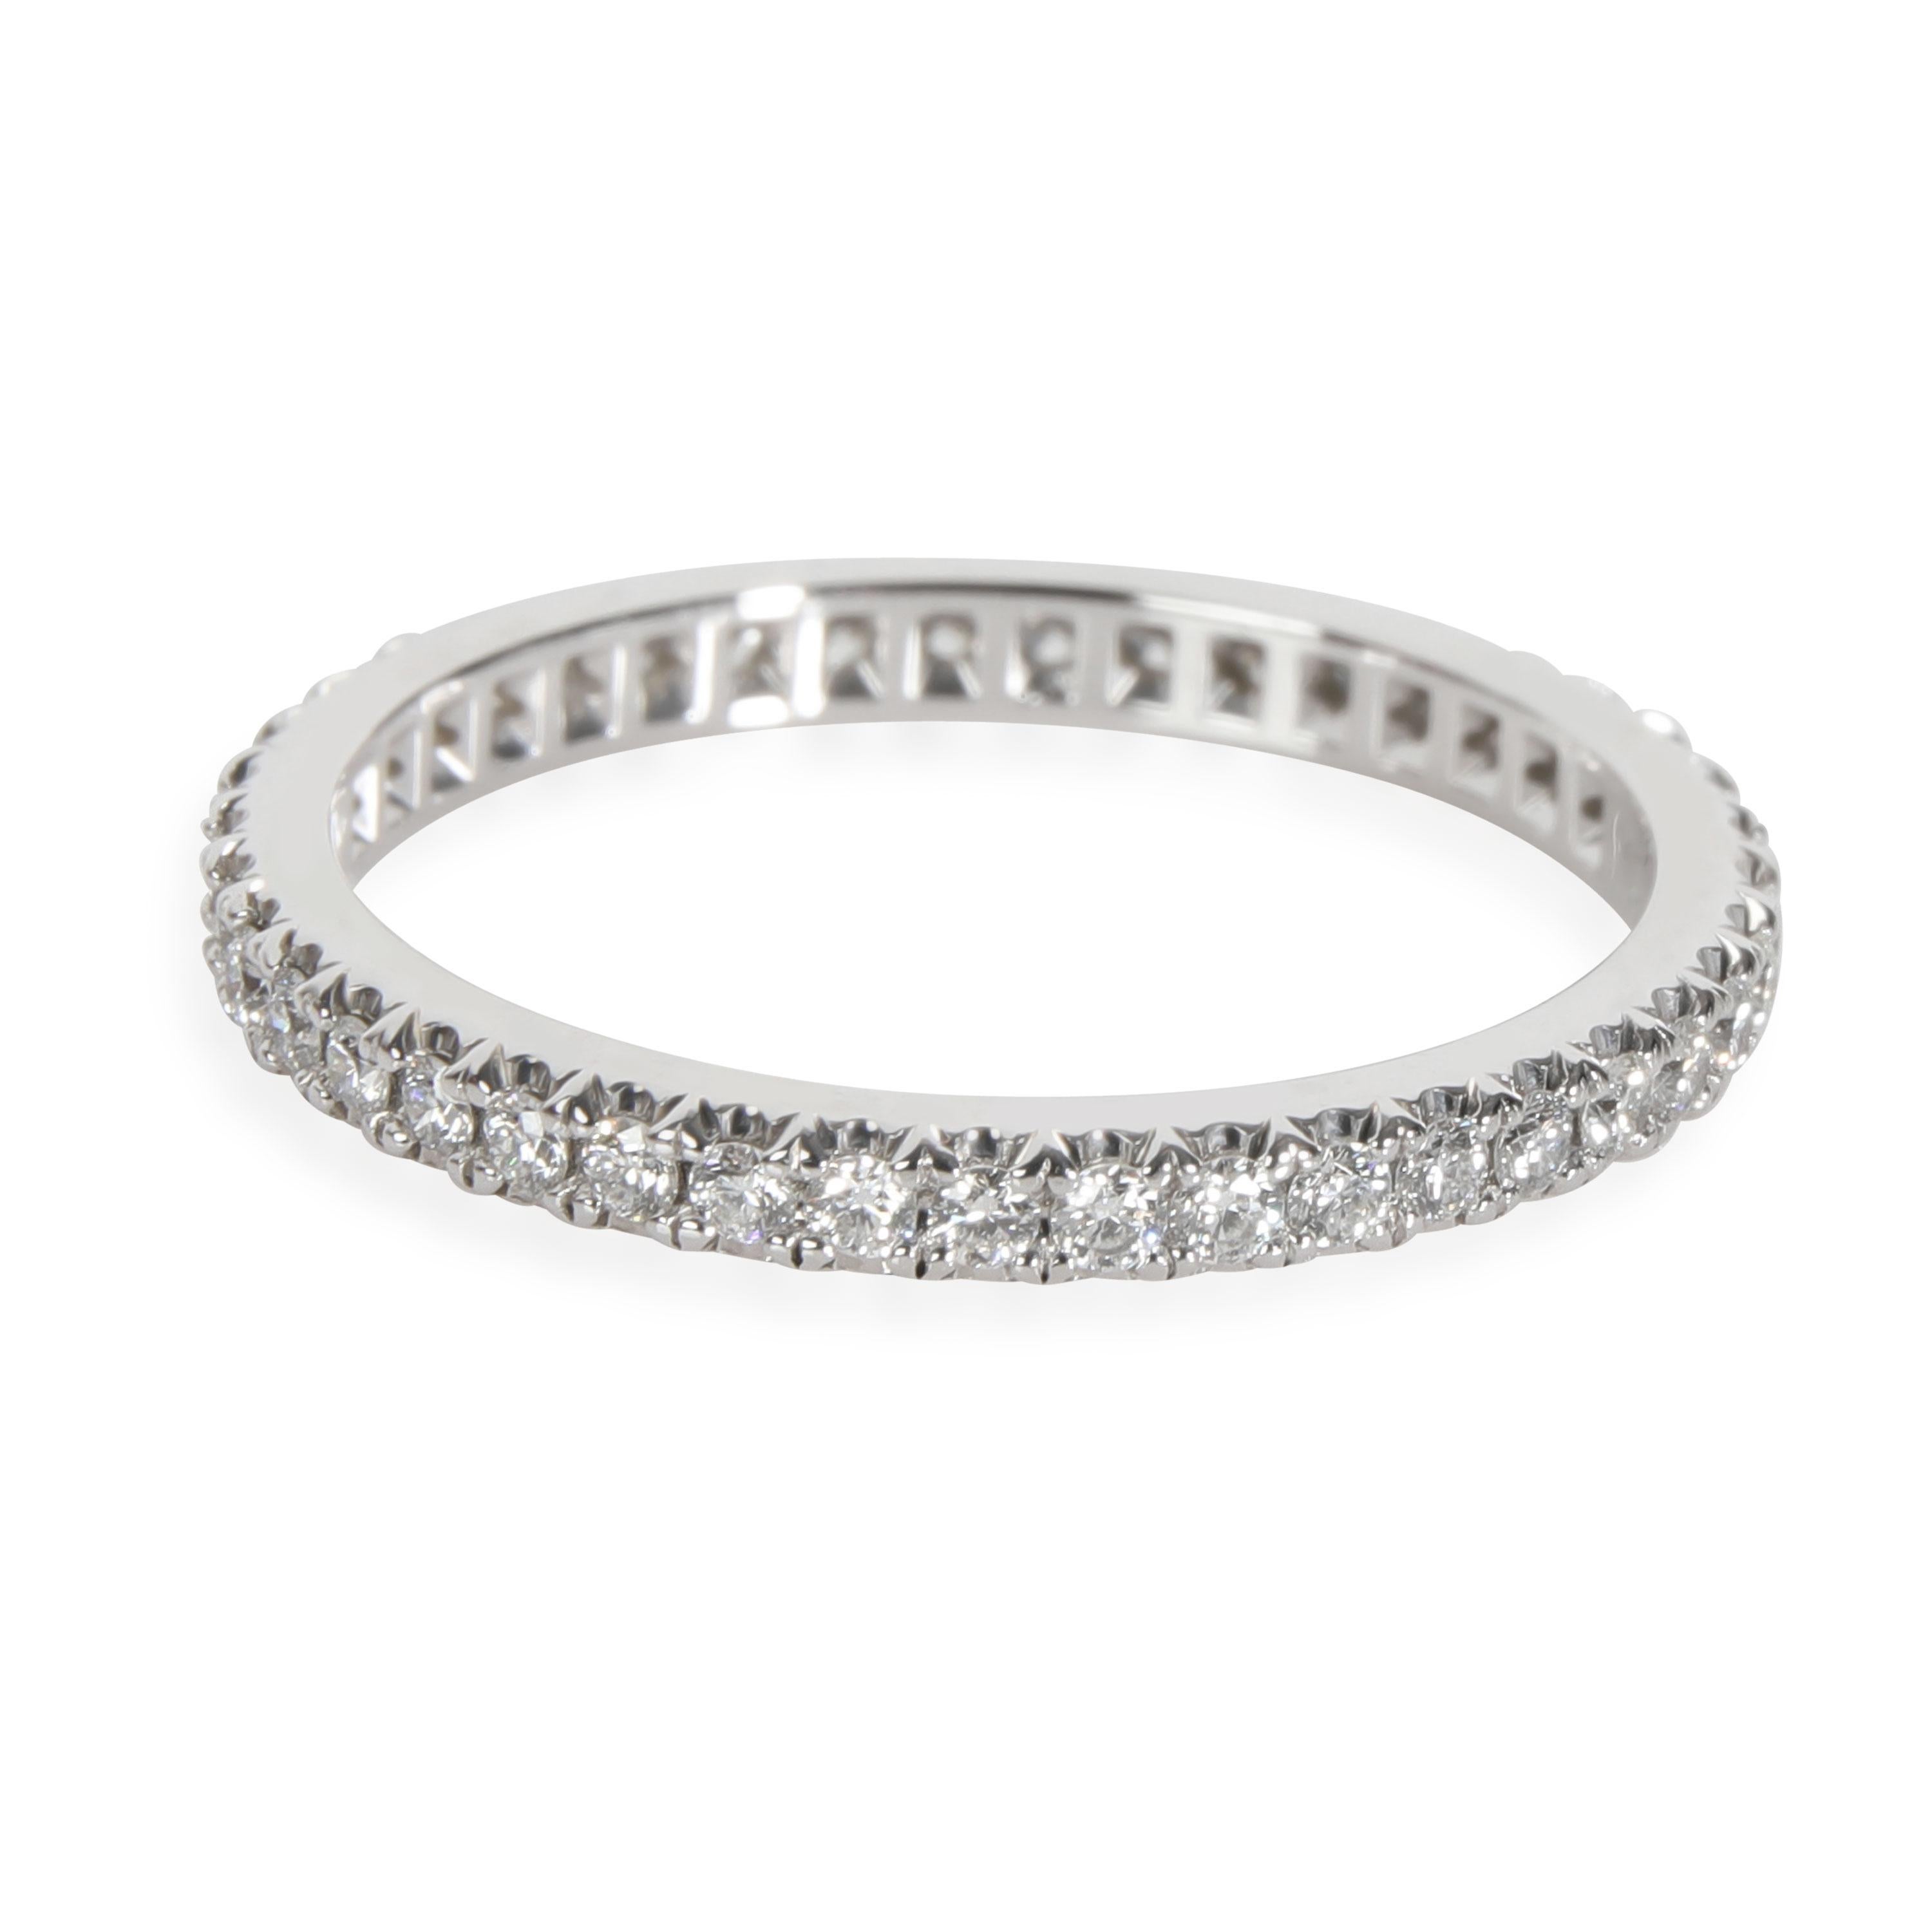 Tiffany & Co. Soleste Diamond Band in Platinum 0.34 CTW

PRIMARY DETAILS
SKU: 111092
Listing Title: Tiffany & Co. Soleste Diamond Band in Platinum 0.34 CTW
Condition Description: In excellent condition and recently polished. Ring size is 5.25. 2mm